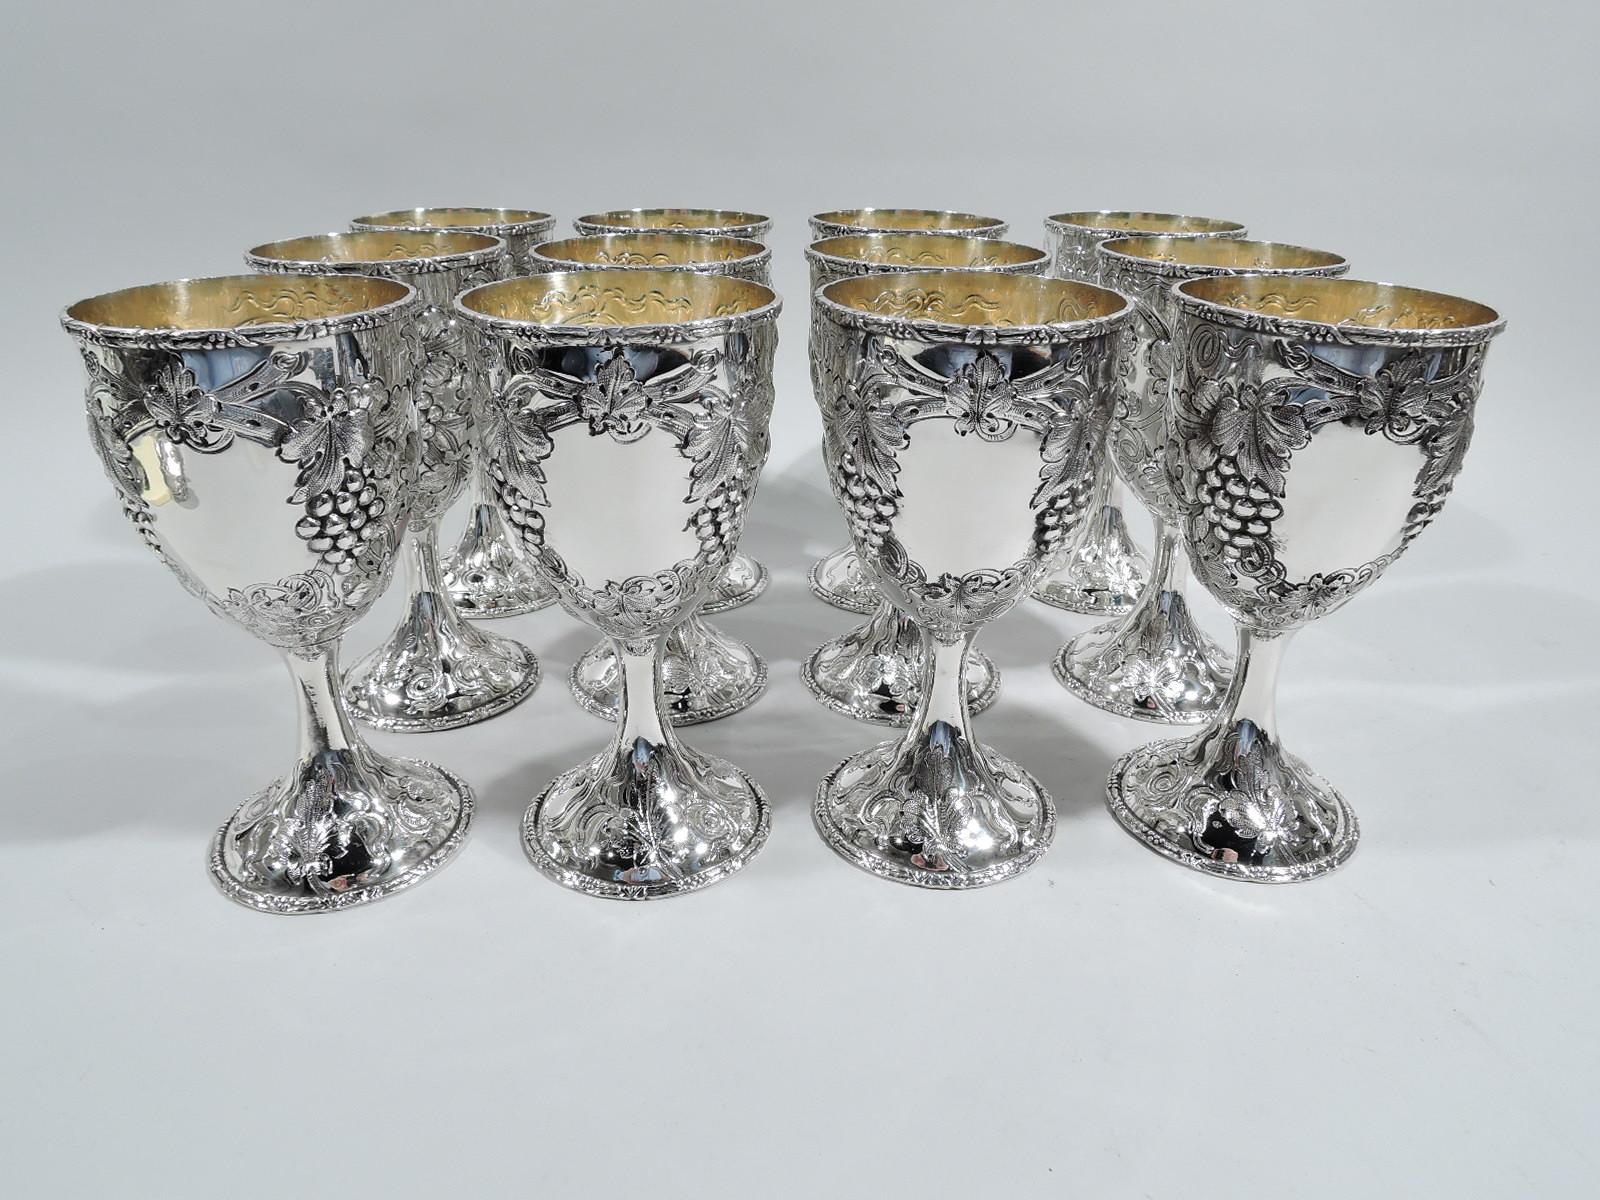 Set of 12 turn-of-the-century sterling silver wine goblets. Made by AG Schultz & Co. in Baltimore. Oval bowl on upward tapering stem flowing into raised foot. Chased and engraved fruiting grapevine wraps around bowl with oval frame (vacant) between